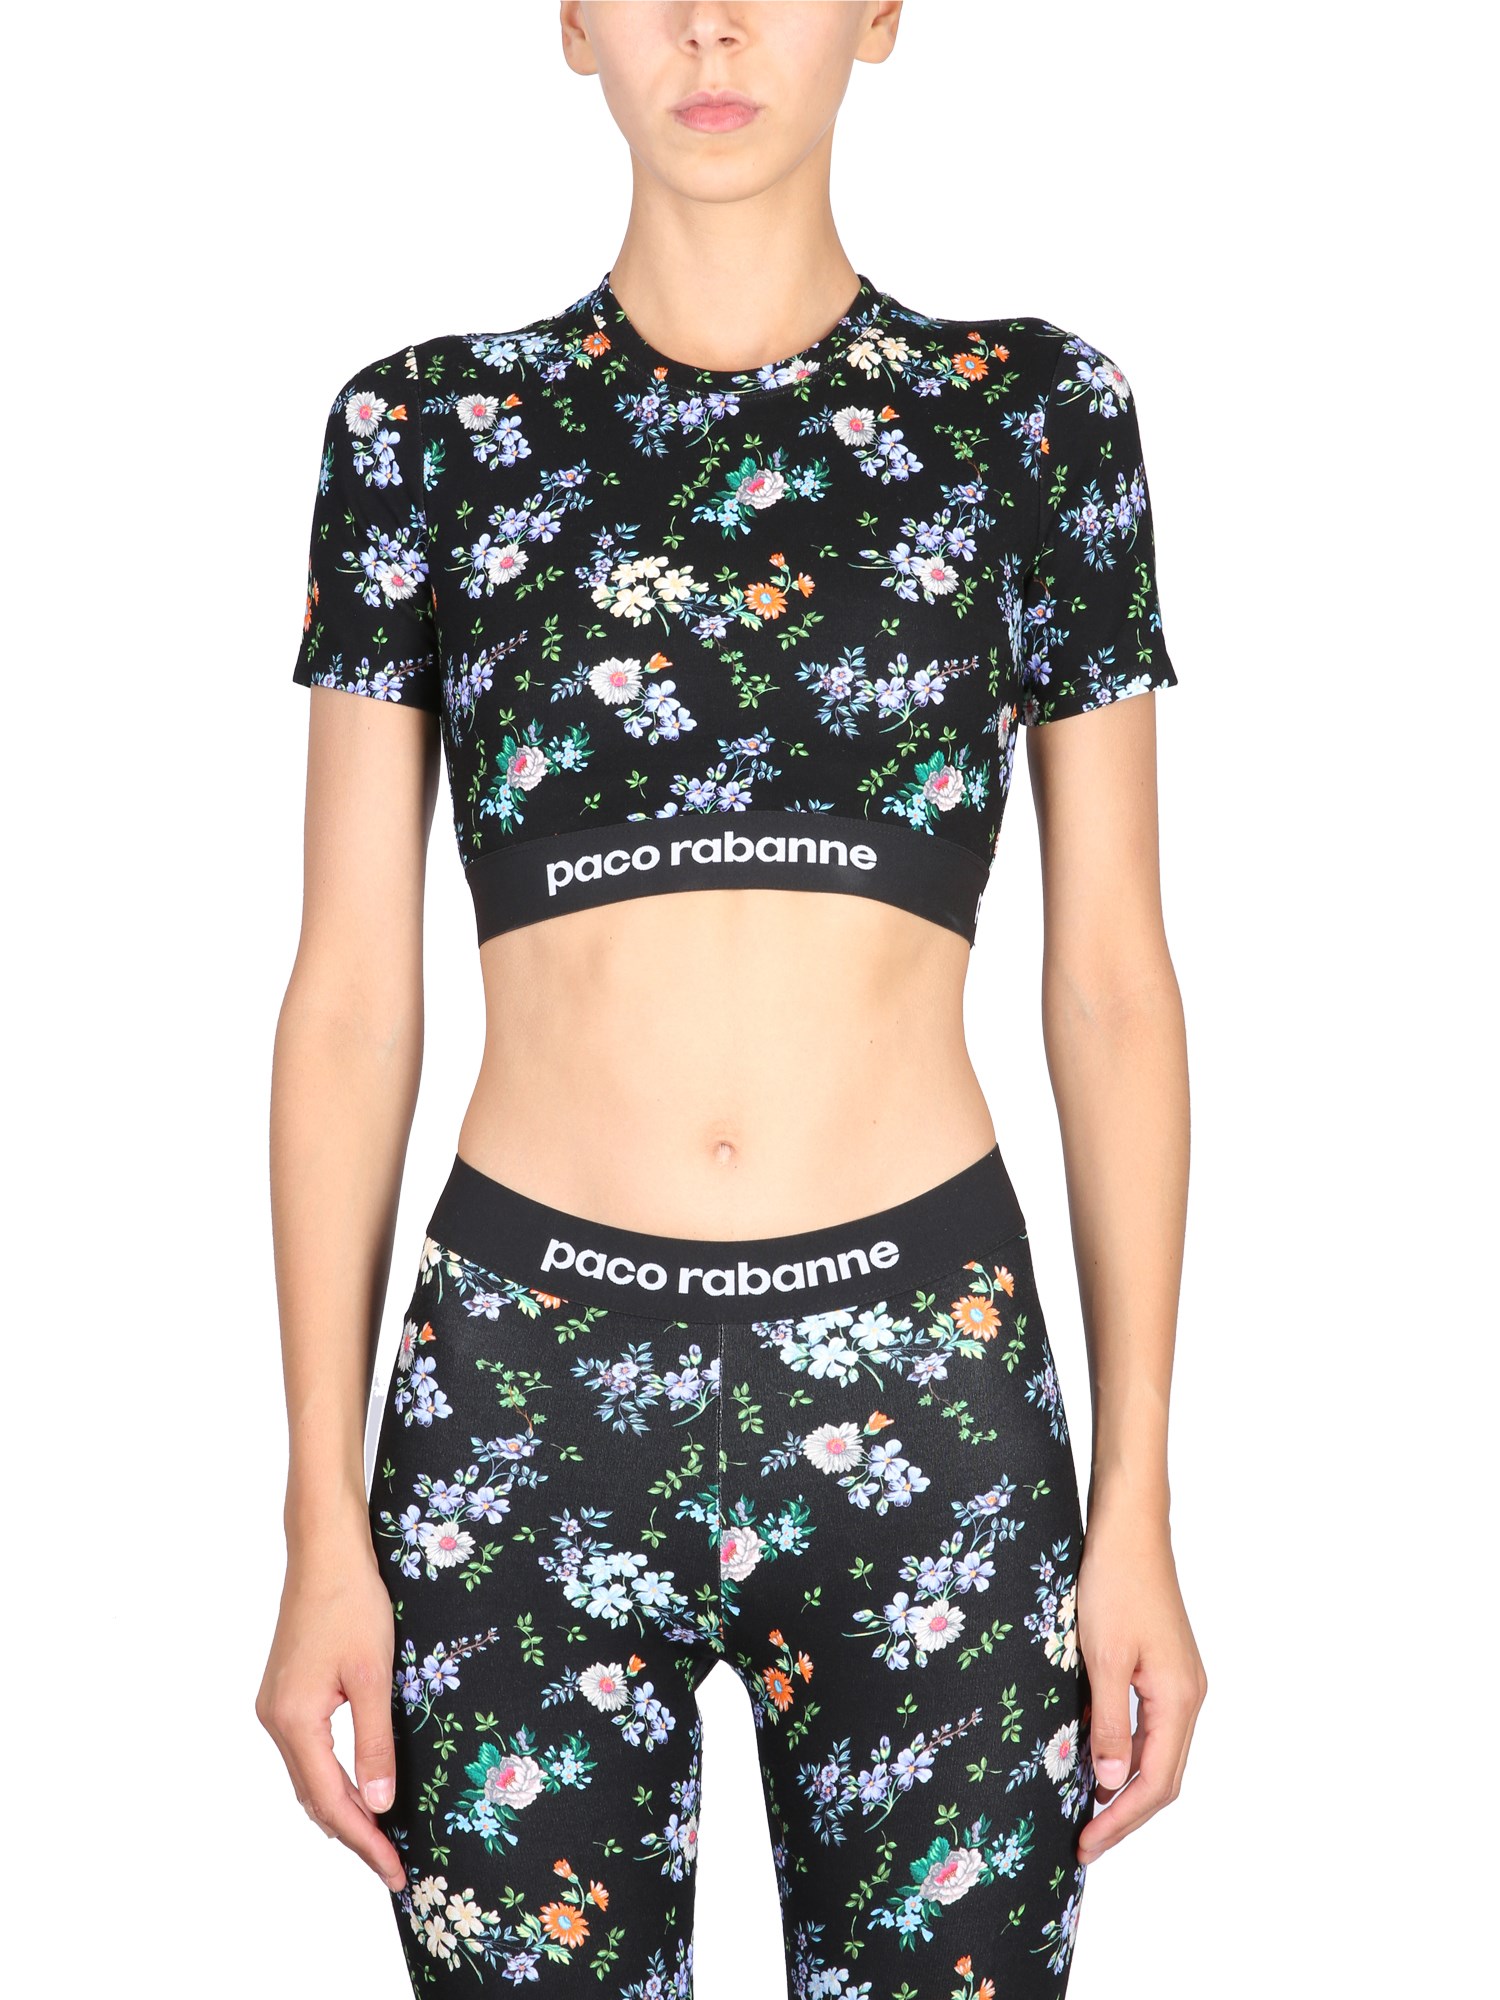 paco rabanne top cropped